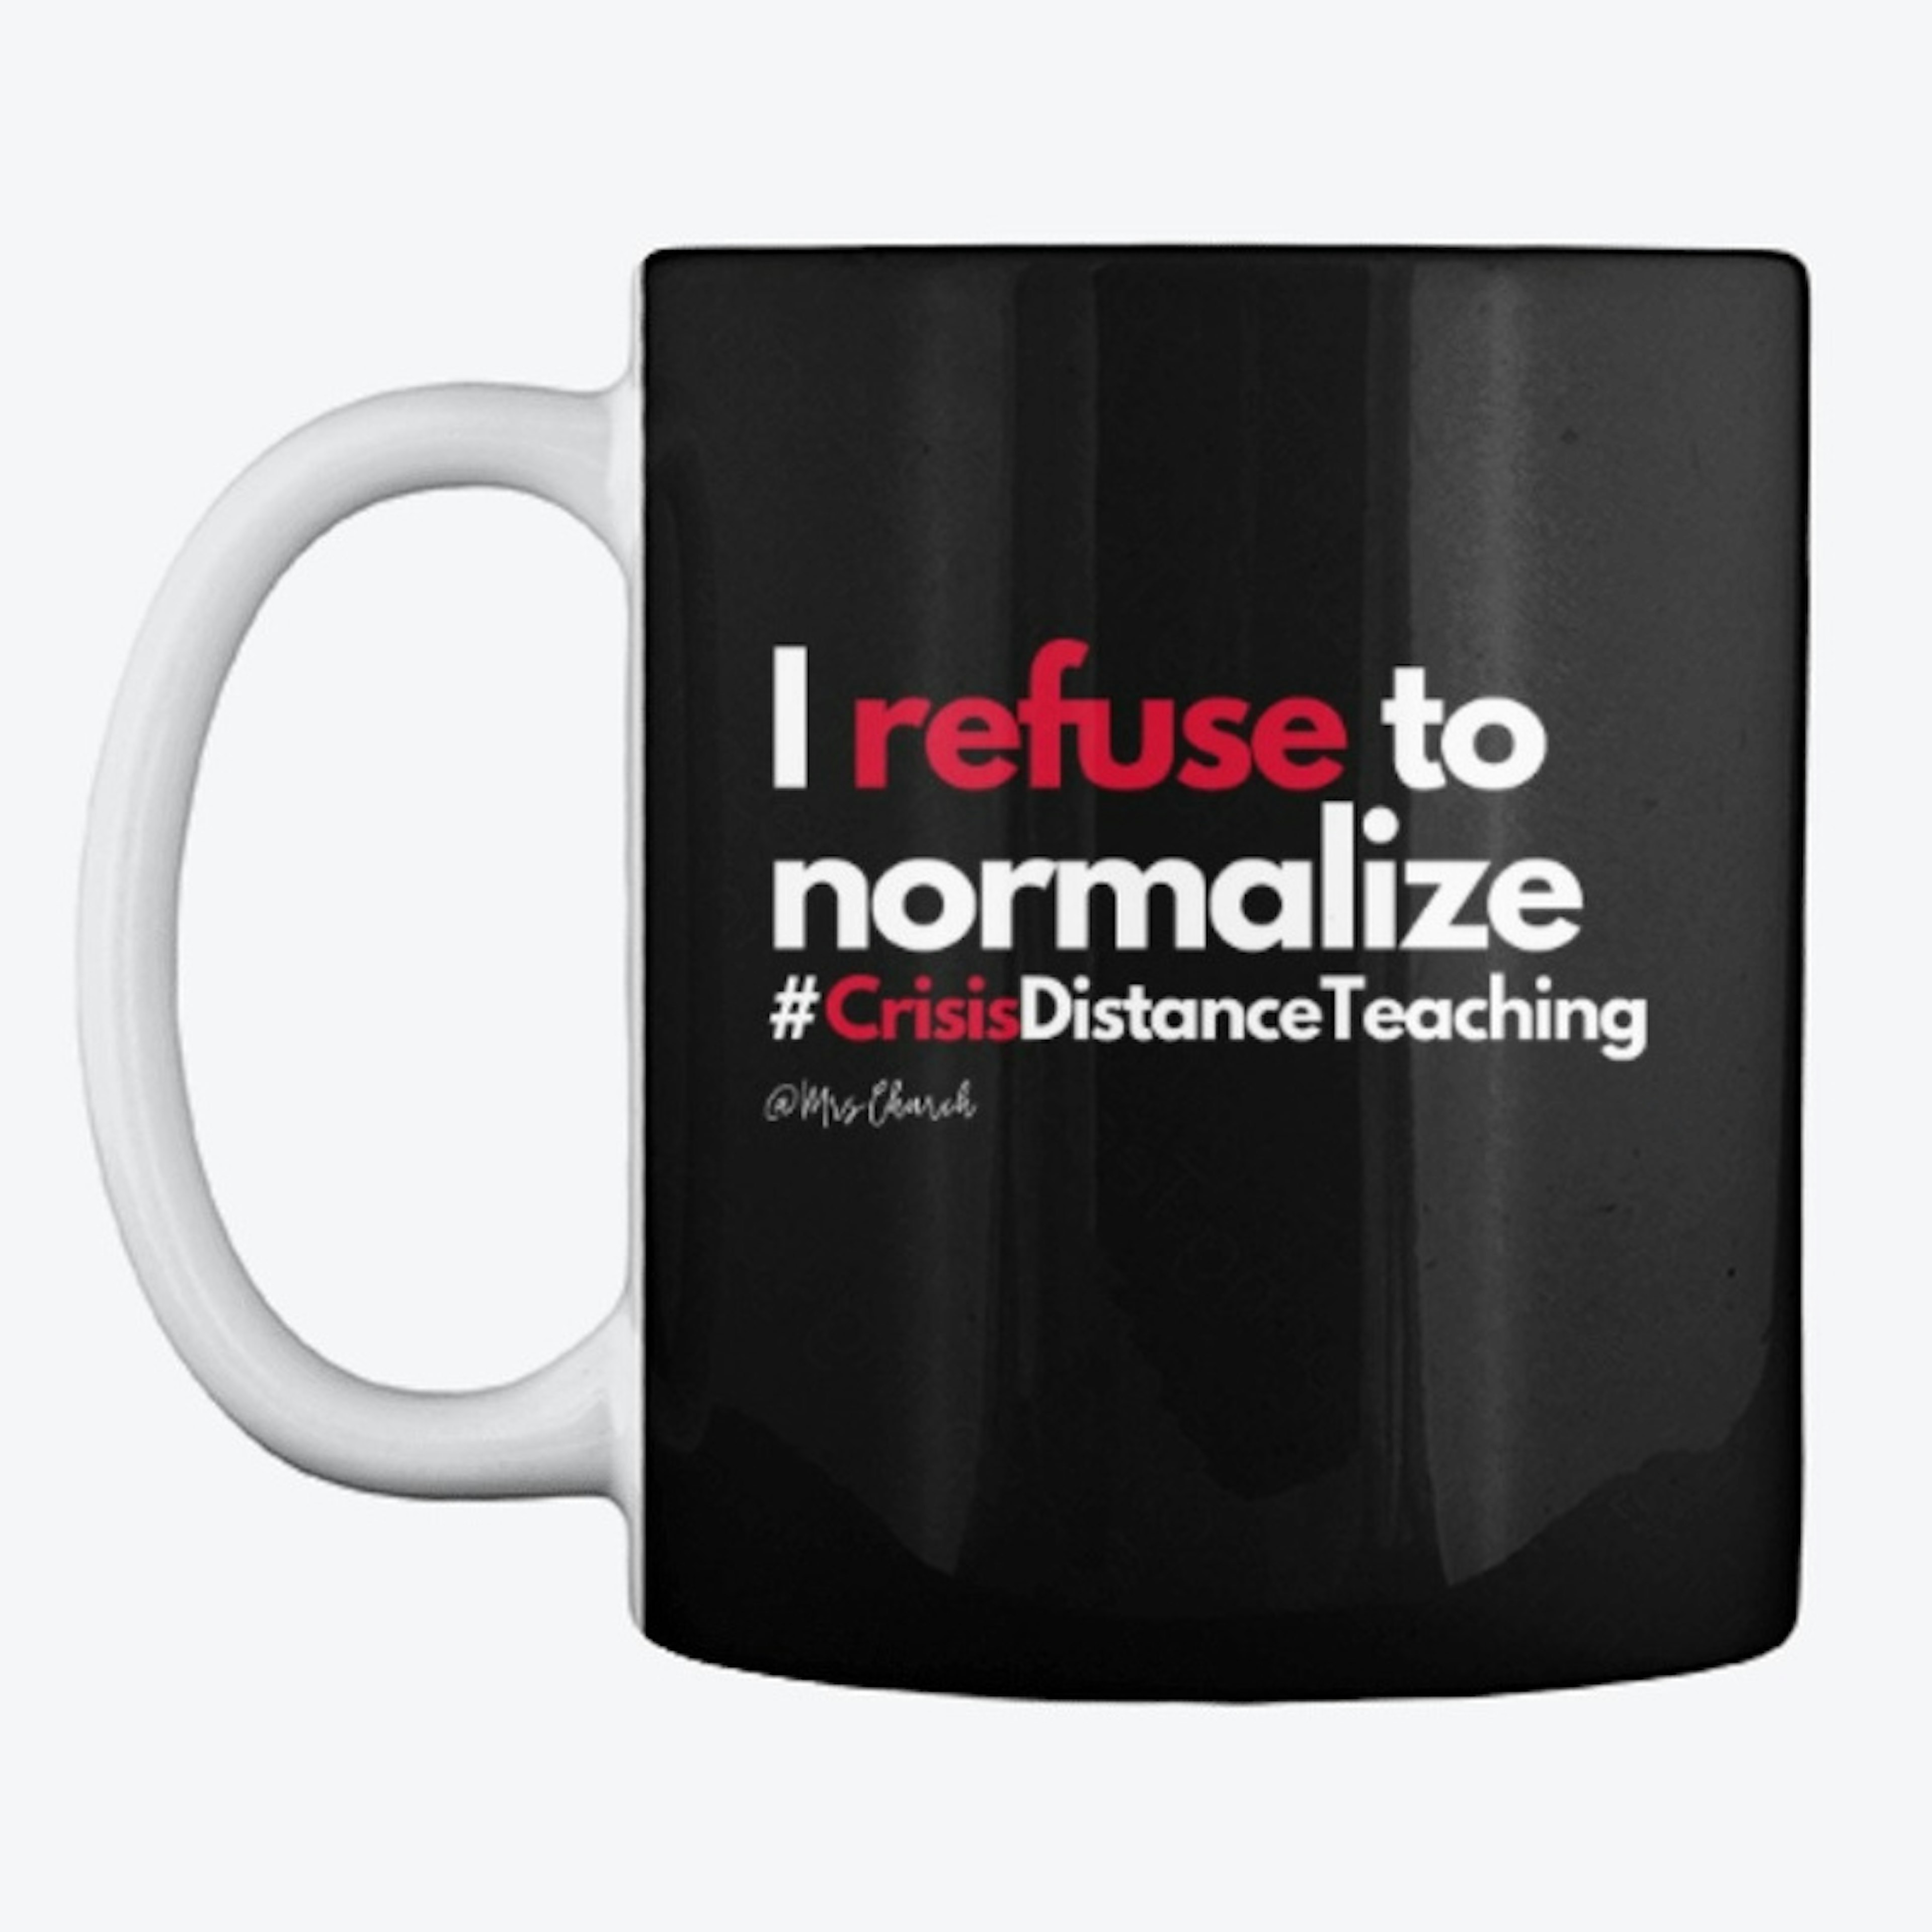 I refuse to normalize this - Coffee Mug